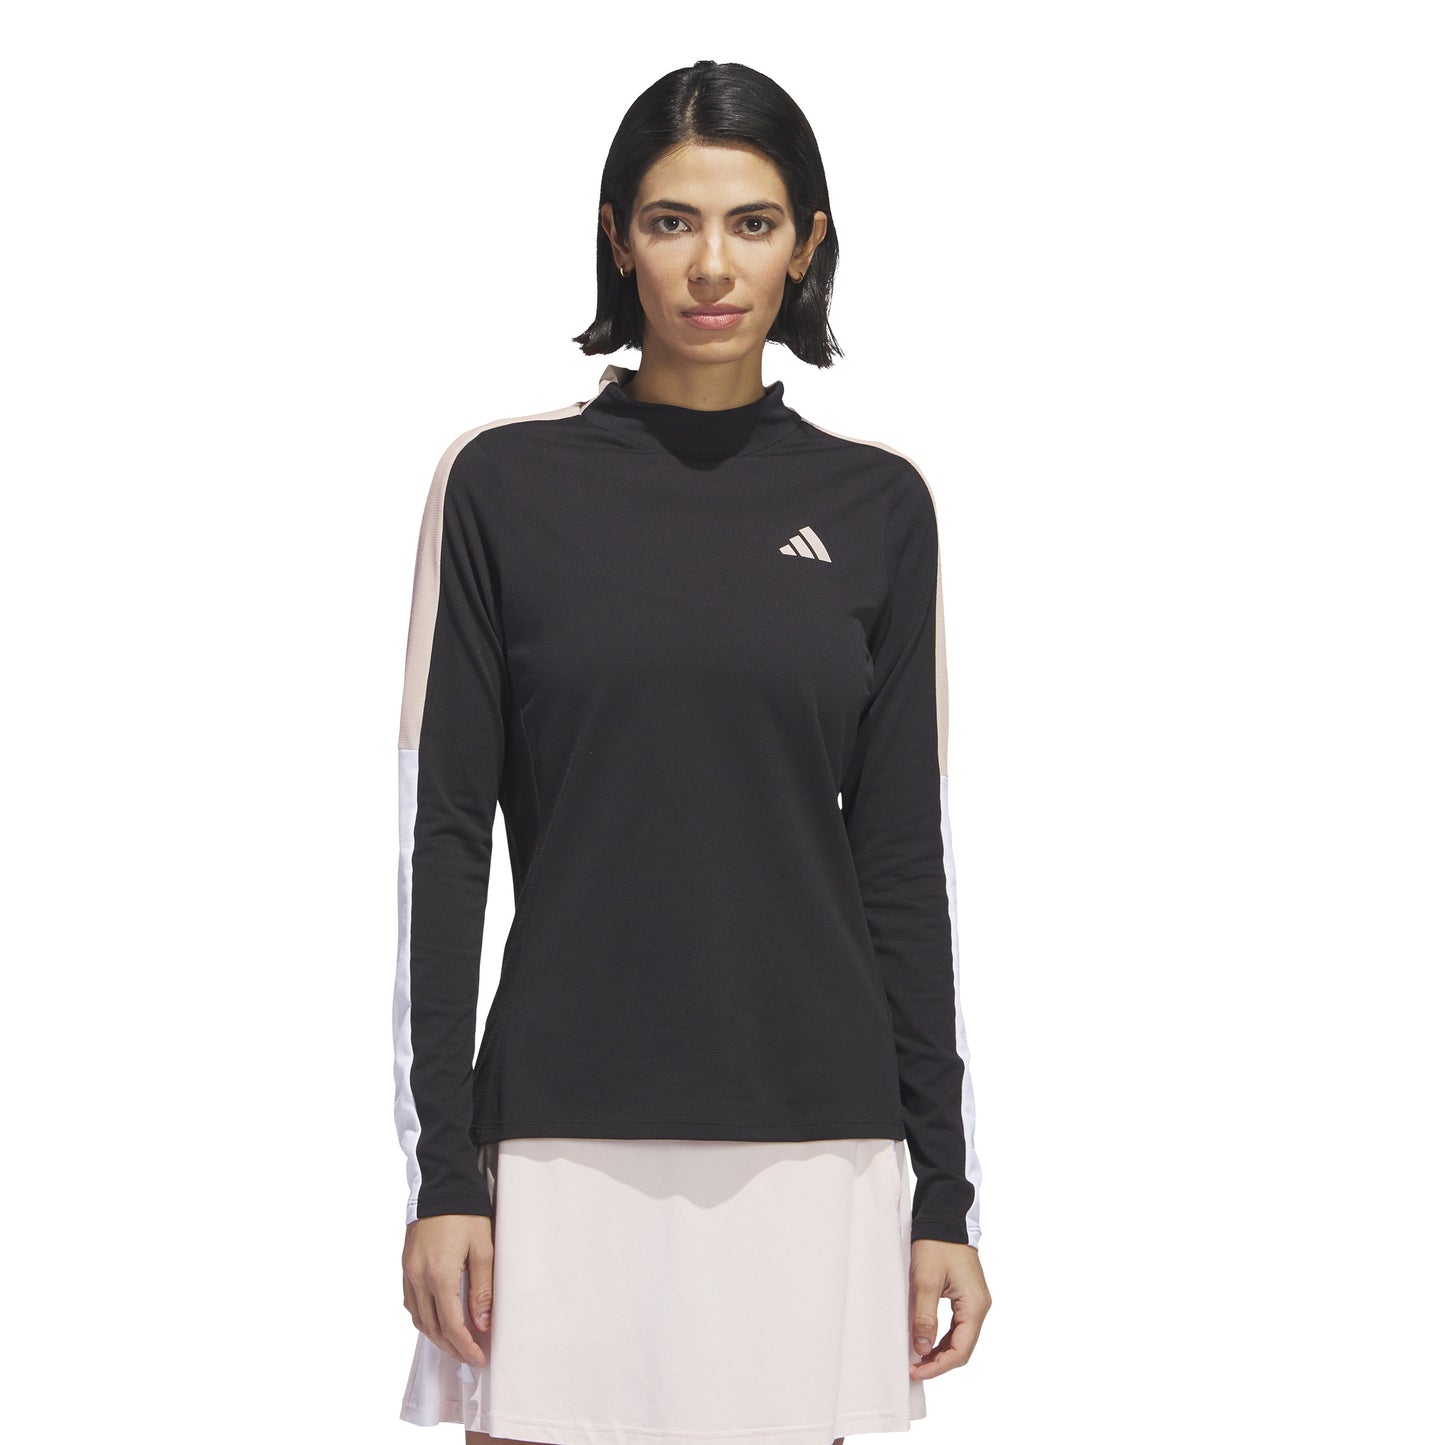 adidas Ladies Long Sleeve Colourblock Golf Top with Mock Neck in Black